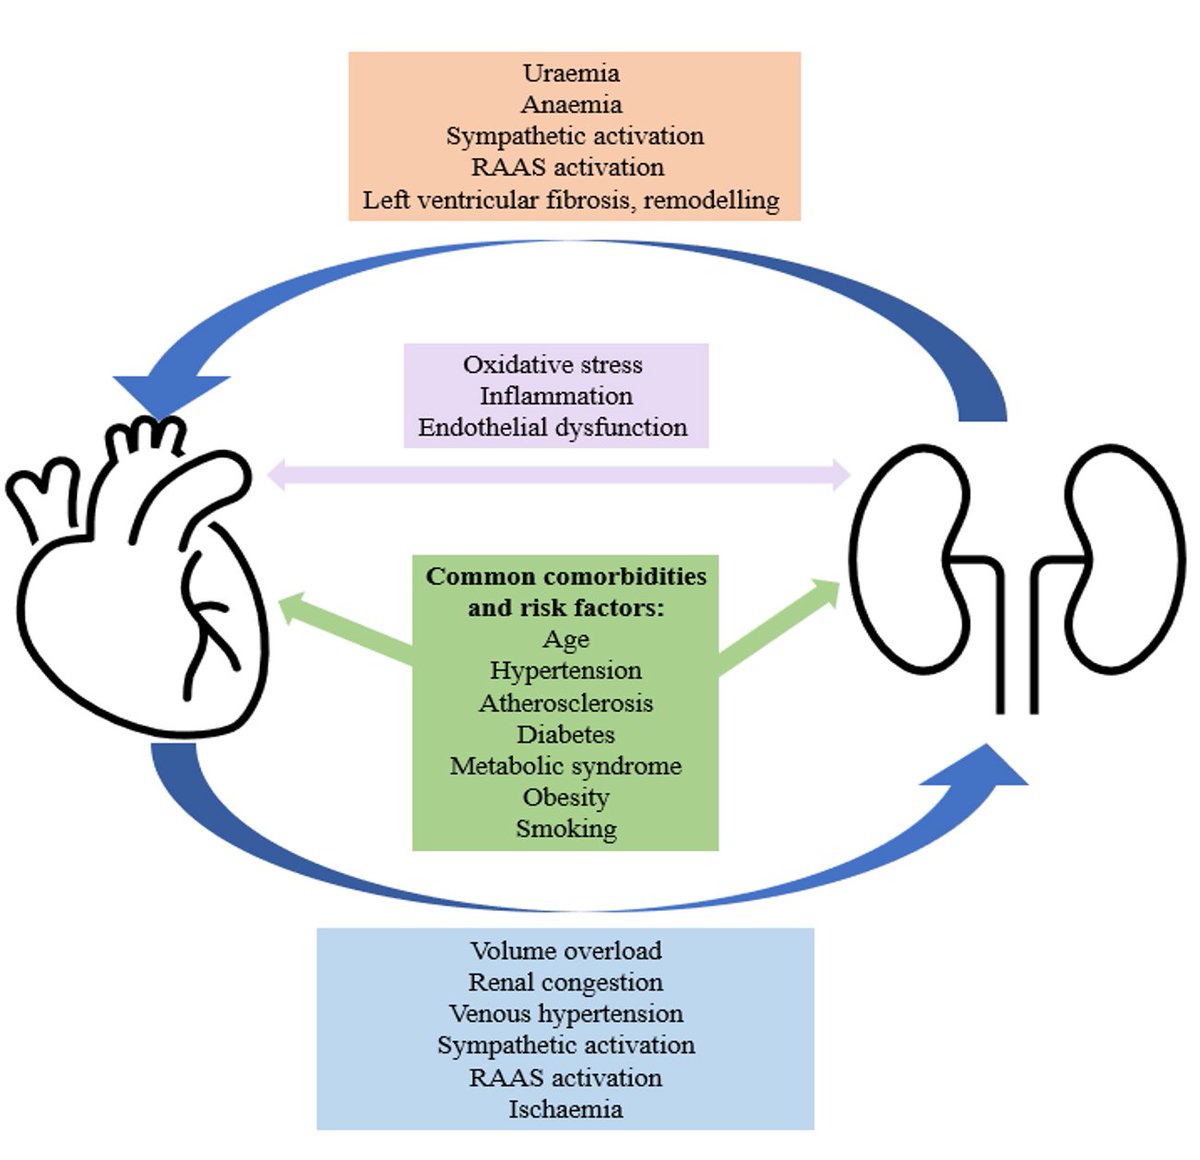 🔴 A 2024 Updated Review of the Management of Chronic Heart Failure in Patients with CKD #openAccess imrpress.com/journal/RCM/25… #CardioEd #Cardiology #FOAMed #meded #MedEd #Cardiology #CardioTwitter #cardiotwitter #cardiotwiteros #CardioEd #MedTwitter #MedX #cardiovascular